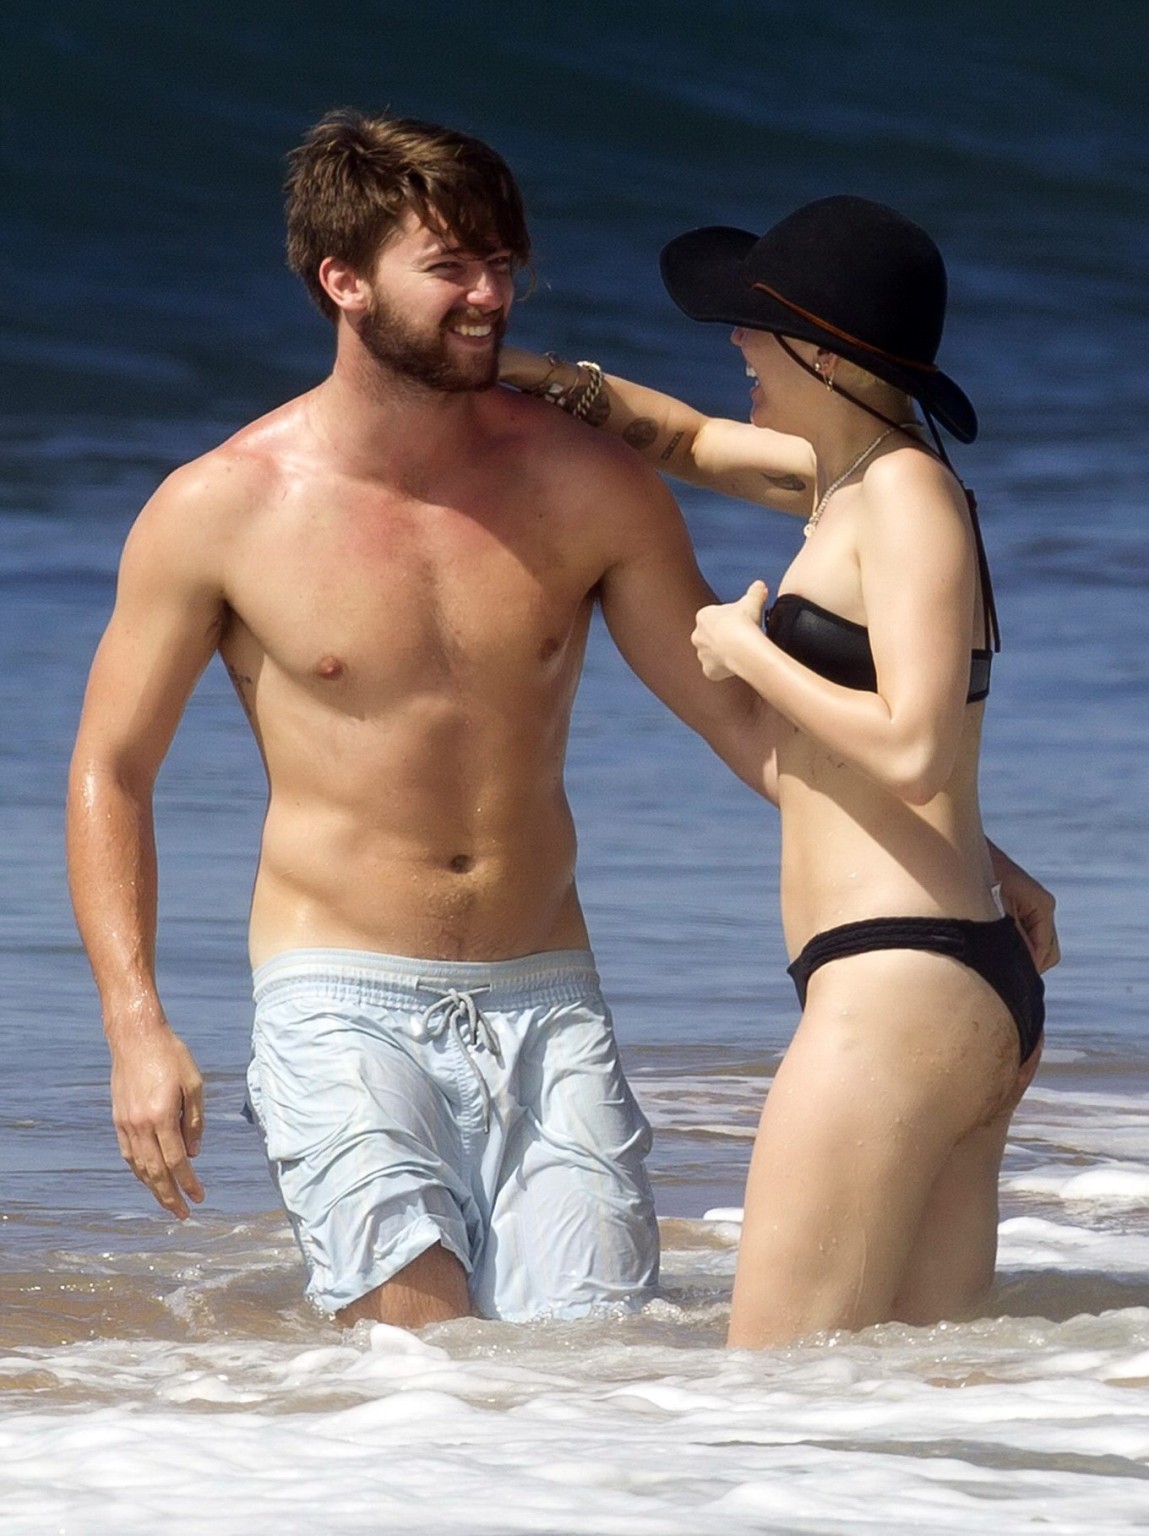 Miley Cyrus showing off her bikini body and getting her ass groped on a Hawaiian